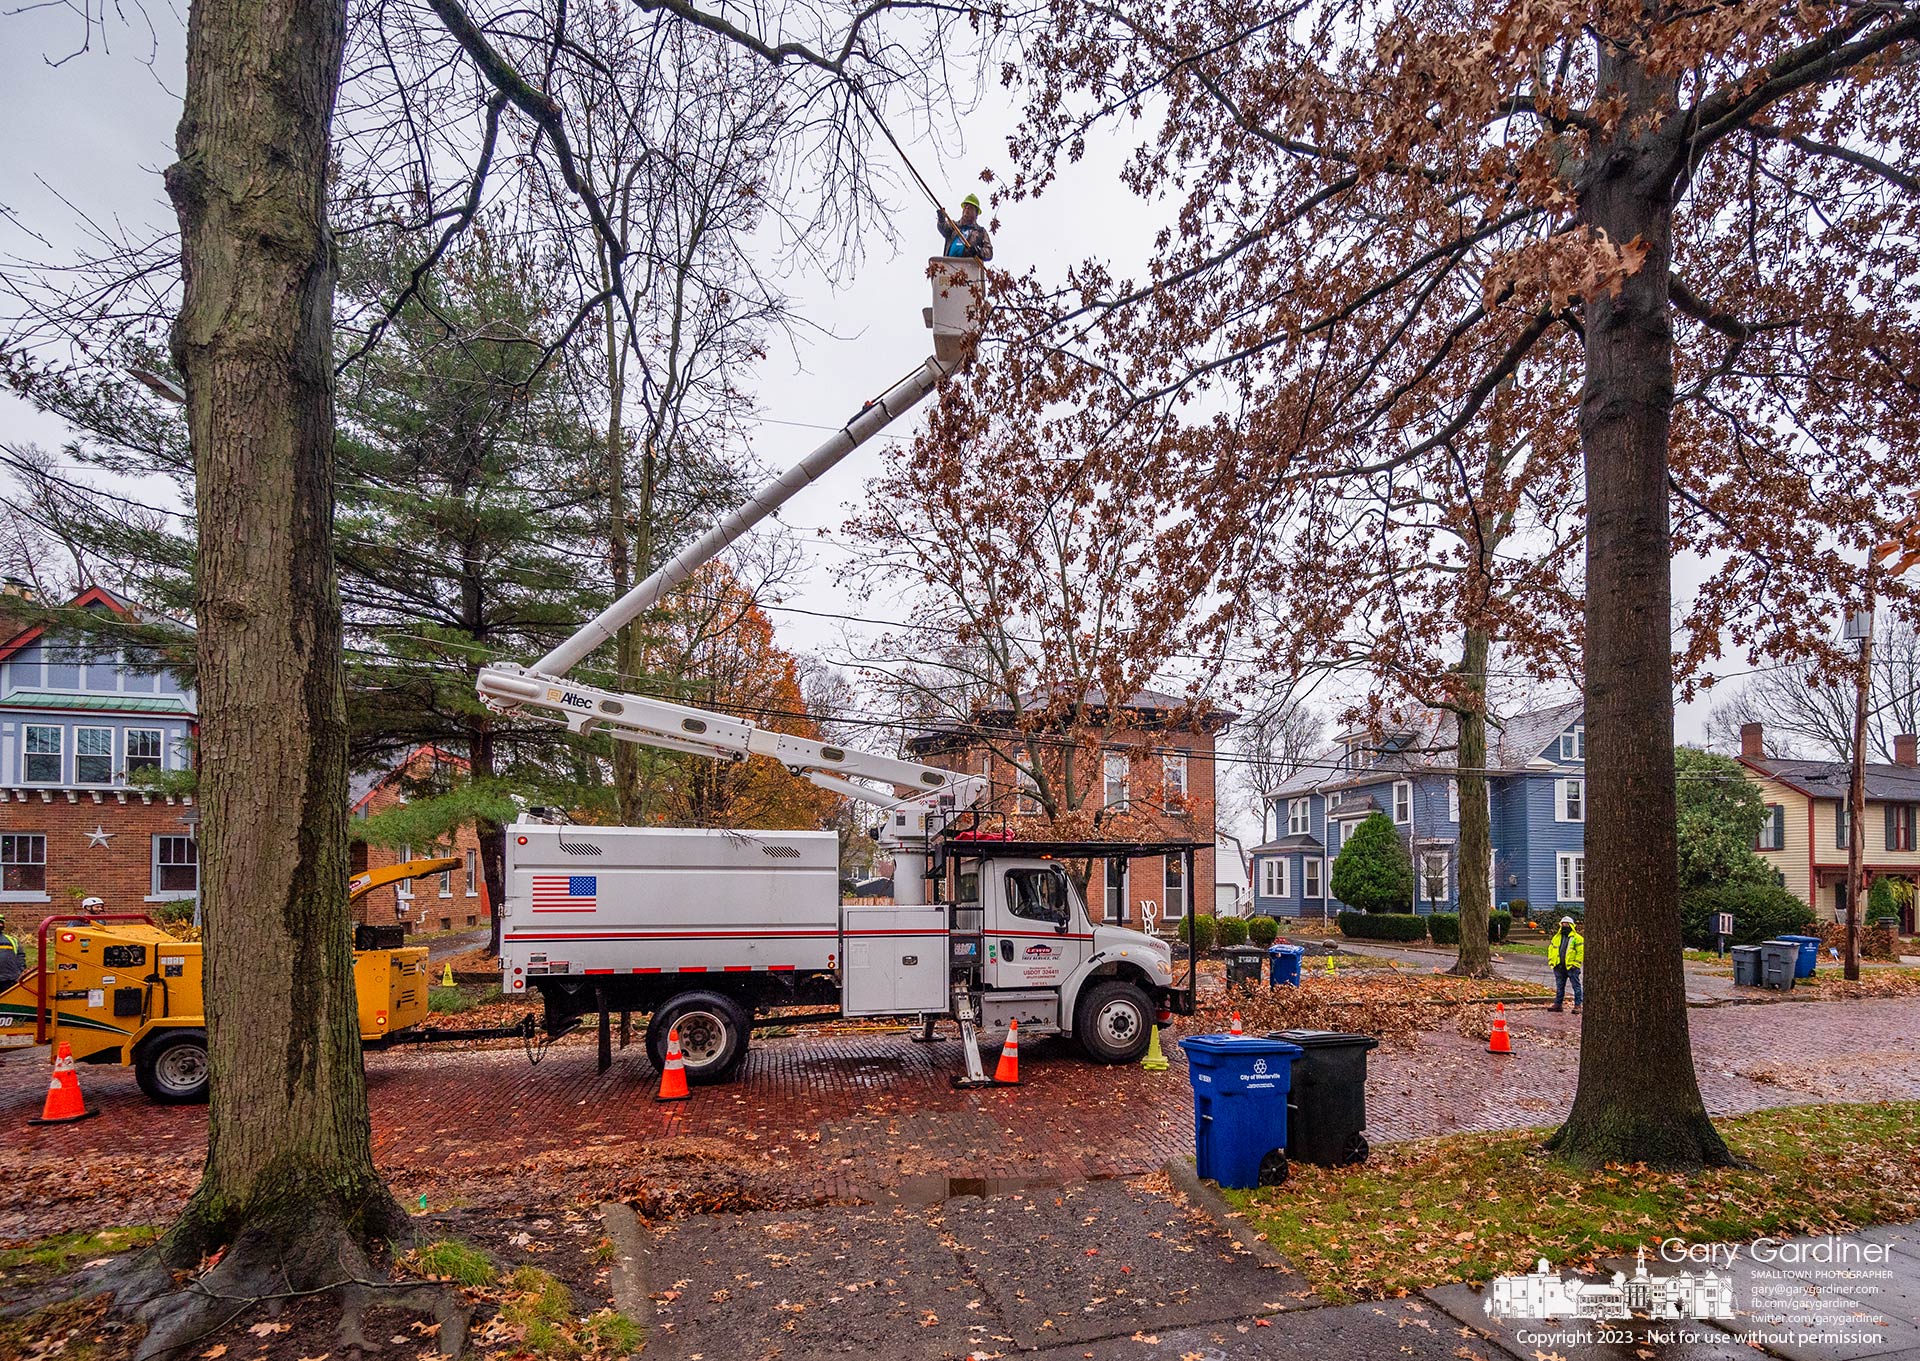 A city contractor cuts overhanging limbs from trees near power lines on West College Avenue to eliminate flickering lights caused by branches brushing the lines. My Final Photo for November 21, 2023.